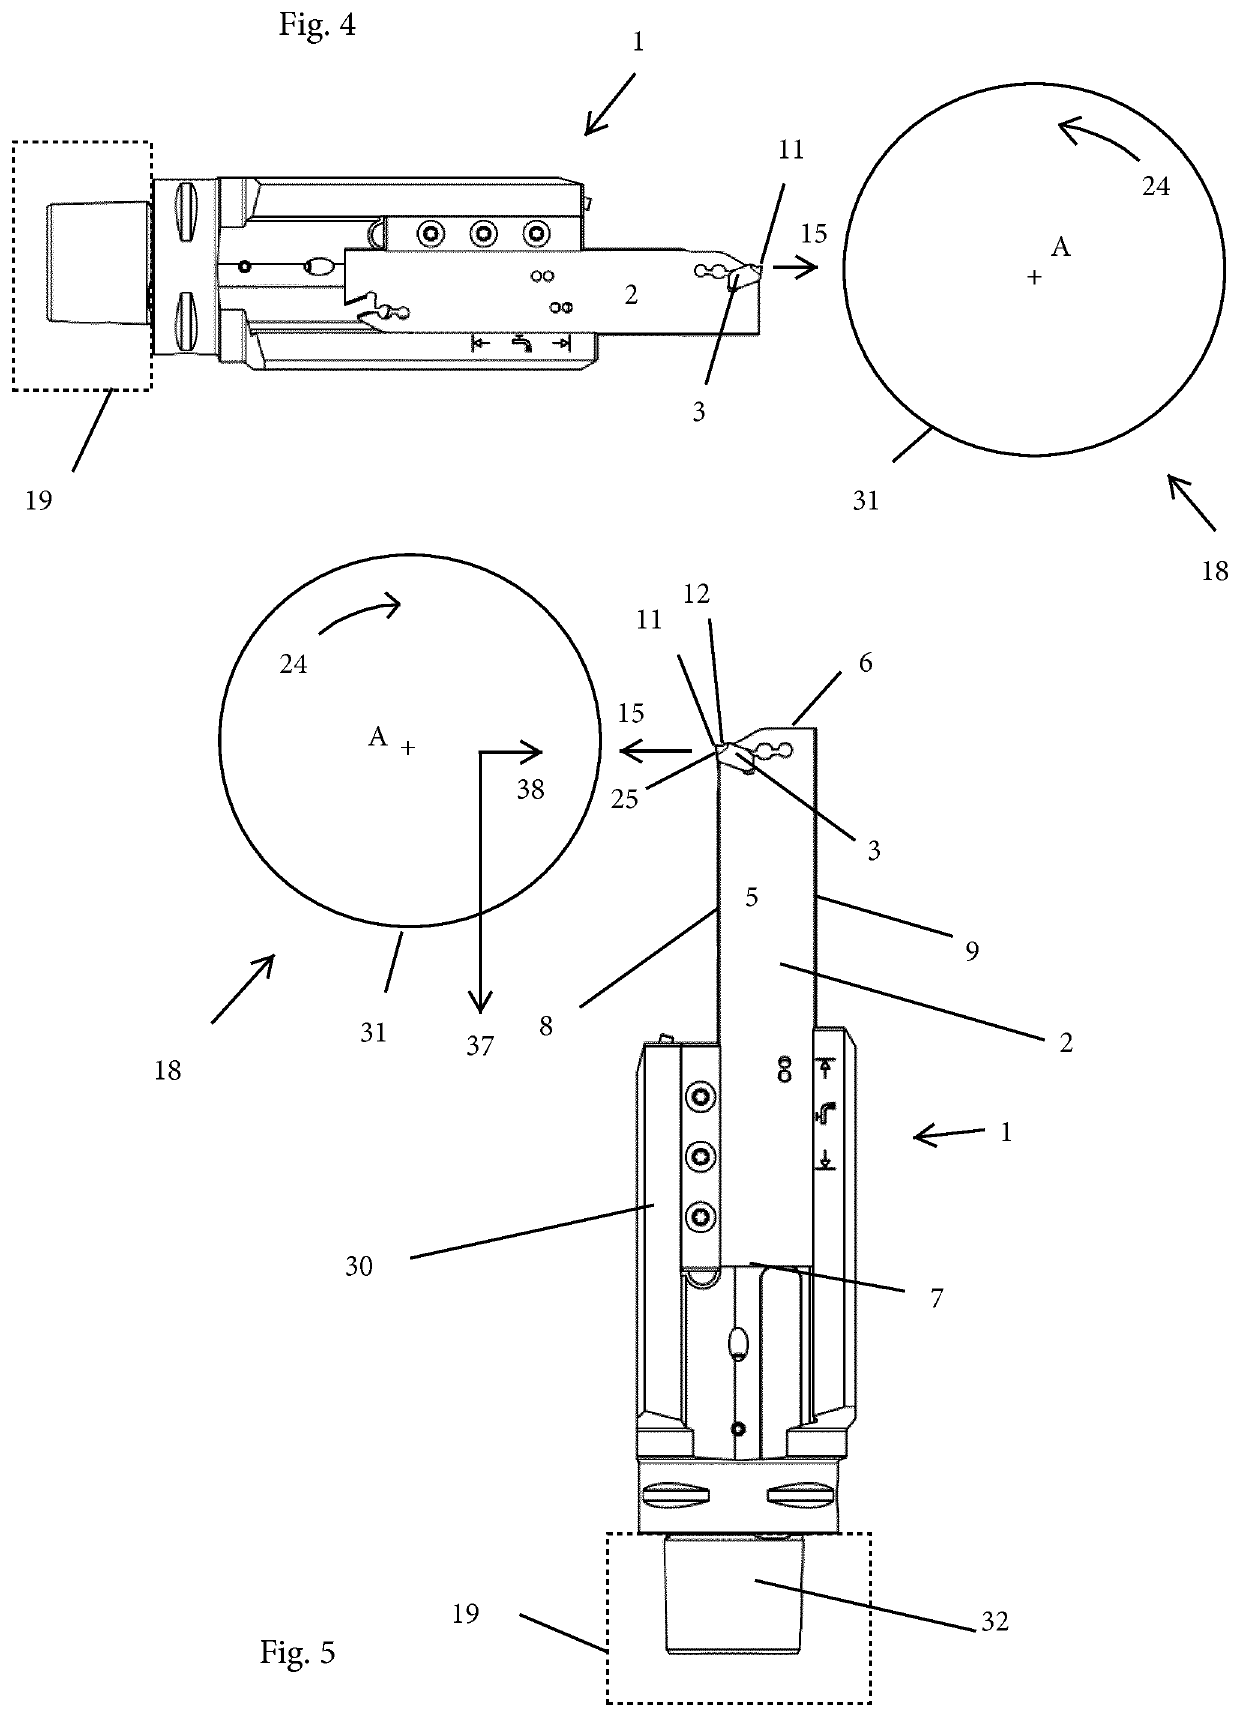 Method of machining a groove